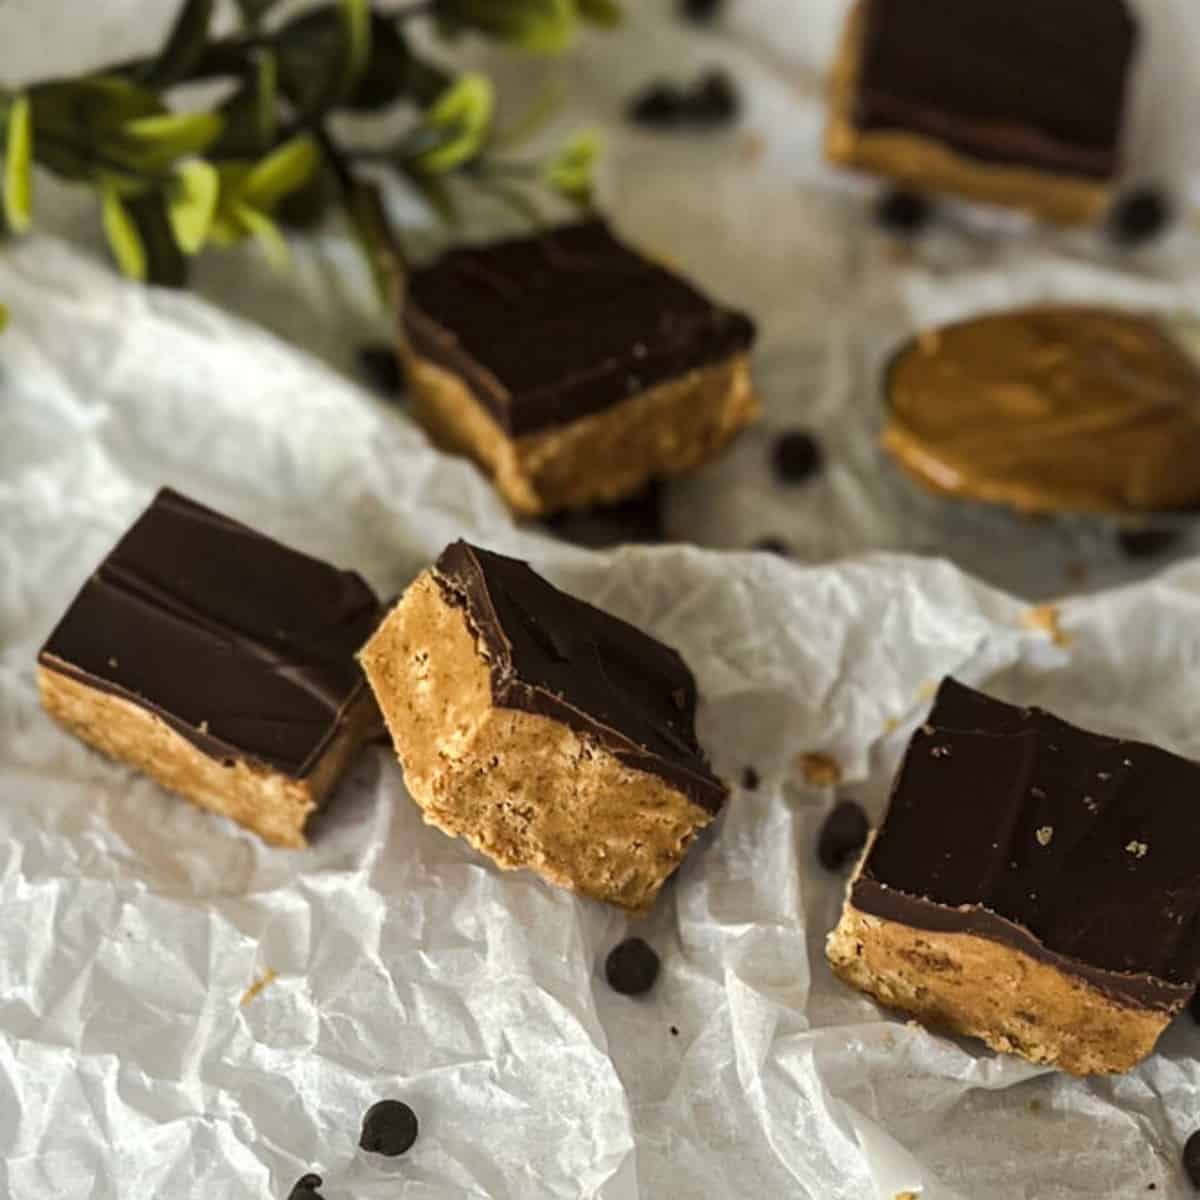  A close-up of a plate of peanut butter protein powder bars. The bars are golden brown in color and have a slightly textured surface. The bars are topped with chocolate chips.